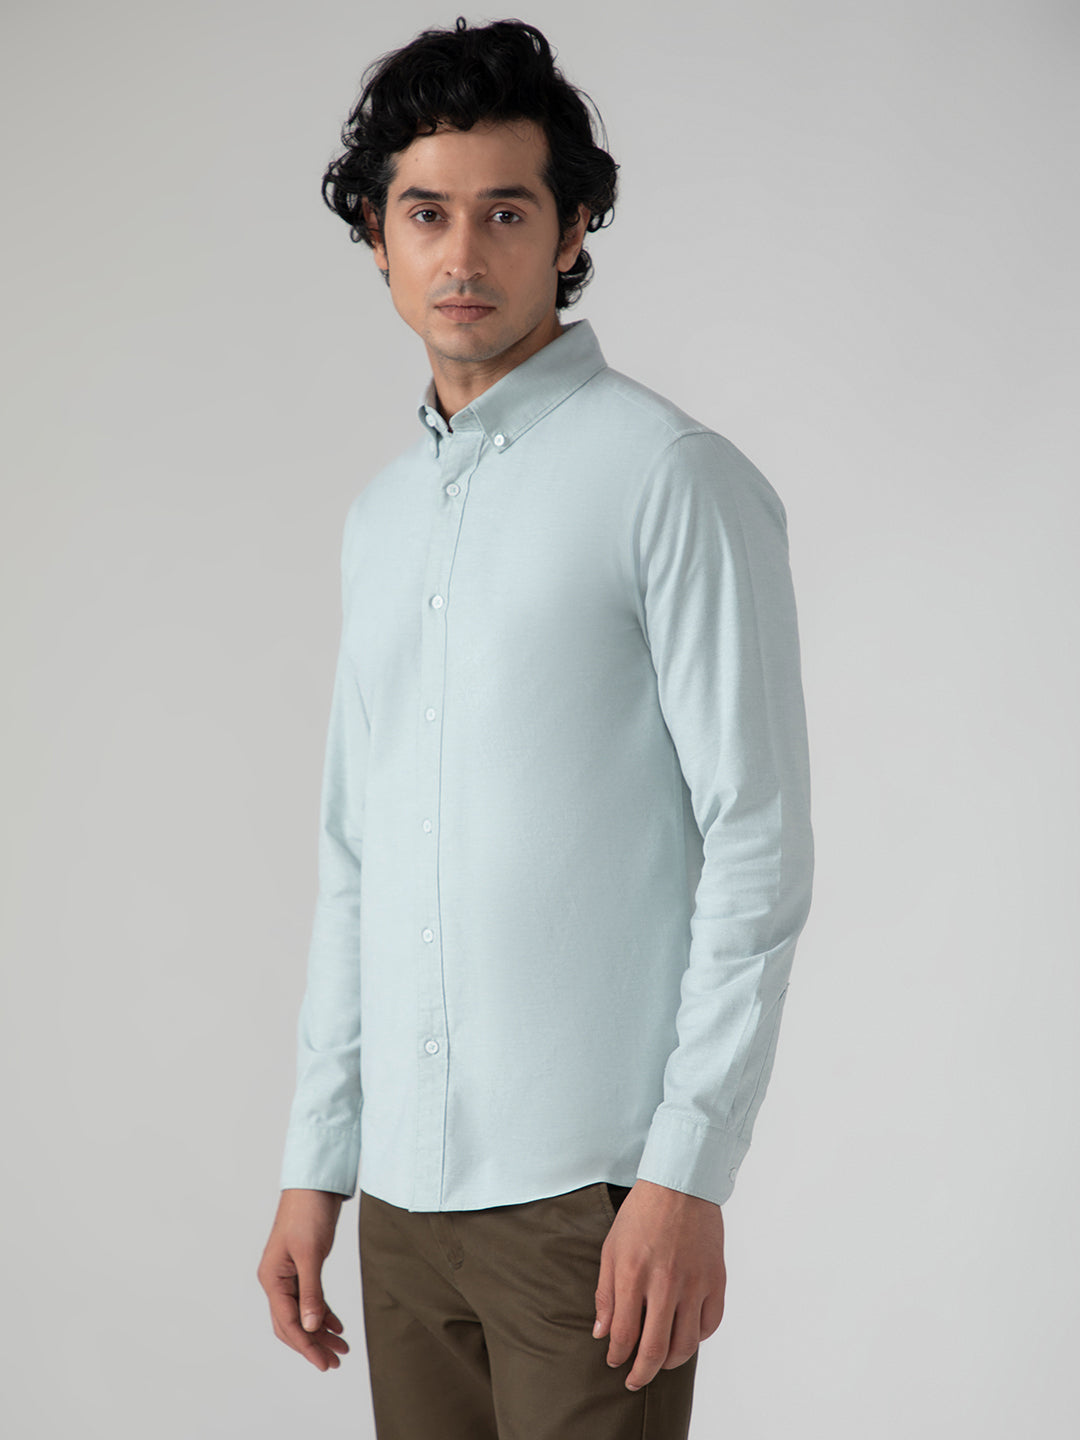 Yarn Dyed Oxford Shirt in Mint Green- Slim Fit